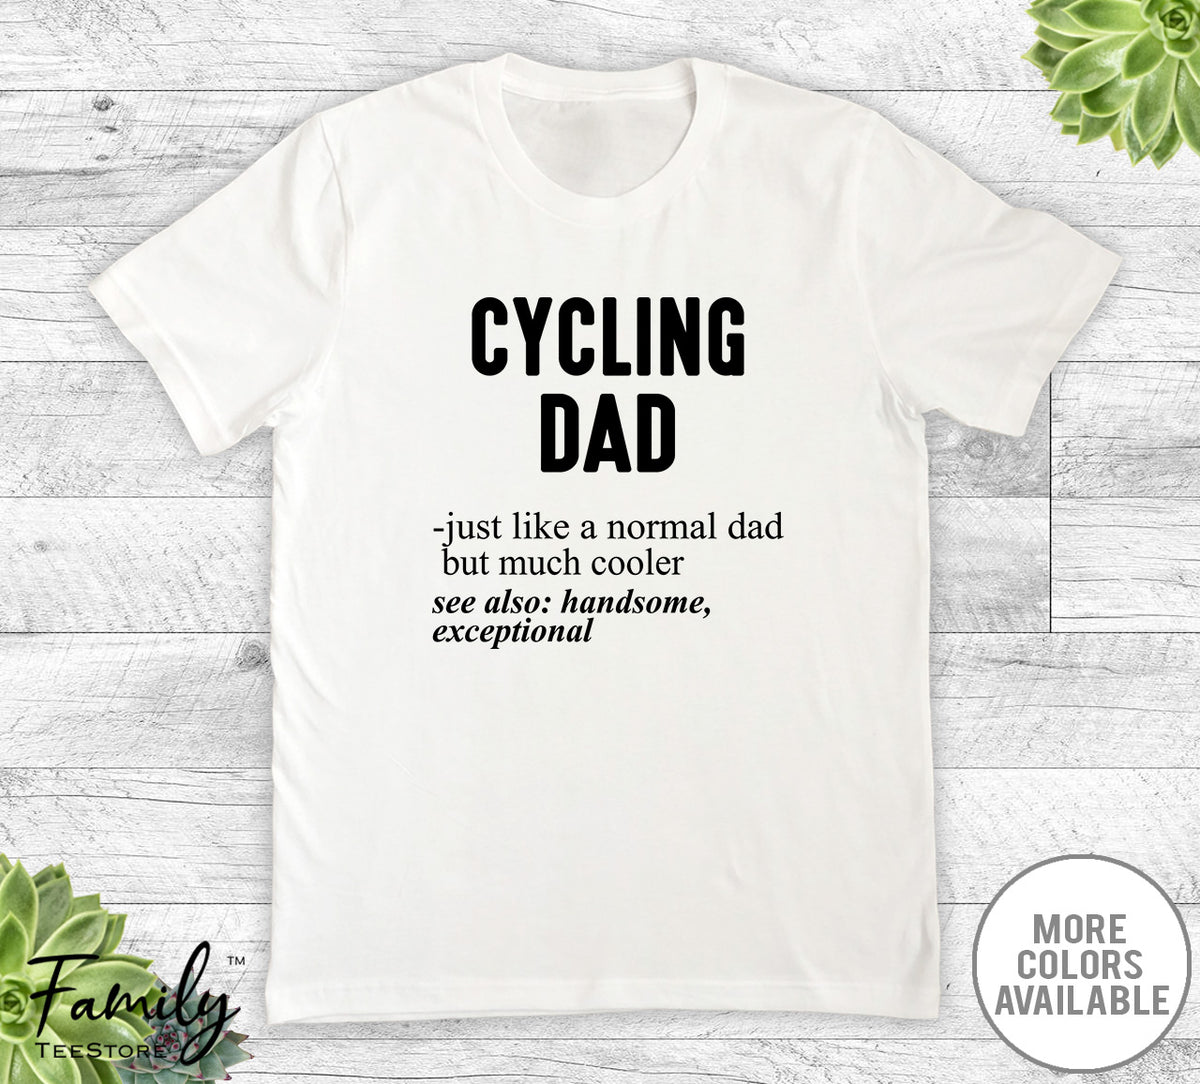 Cycling Dad Just Like A Normal Dad - Unisex T-shirt - Cycling Shirt - Cycling Dad Gift - familyteeprints